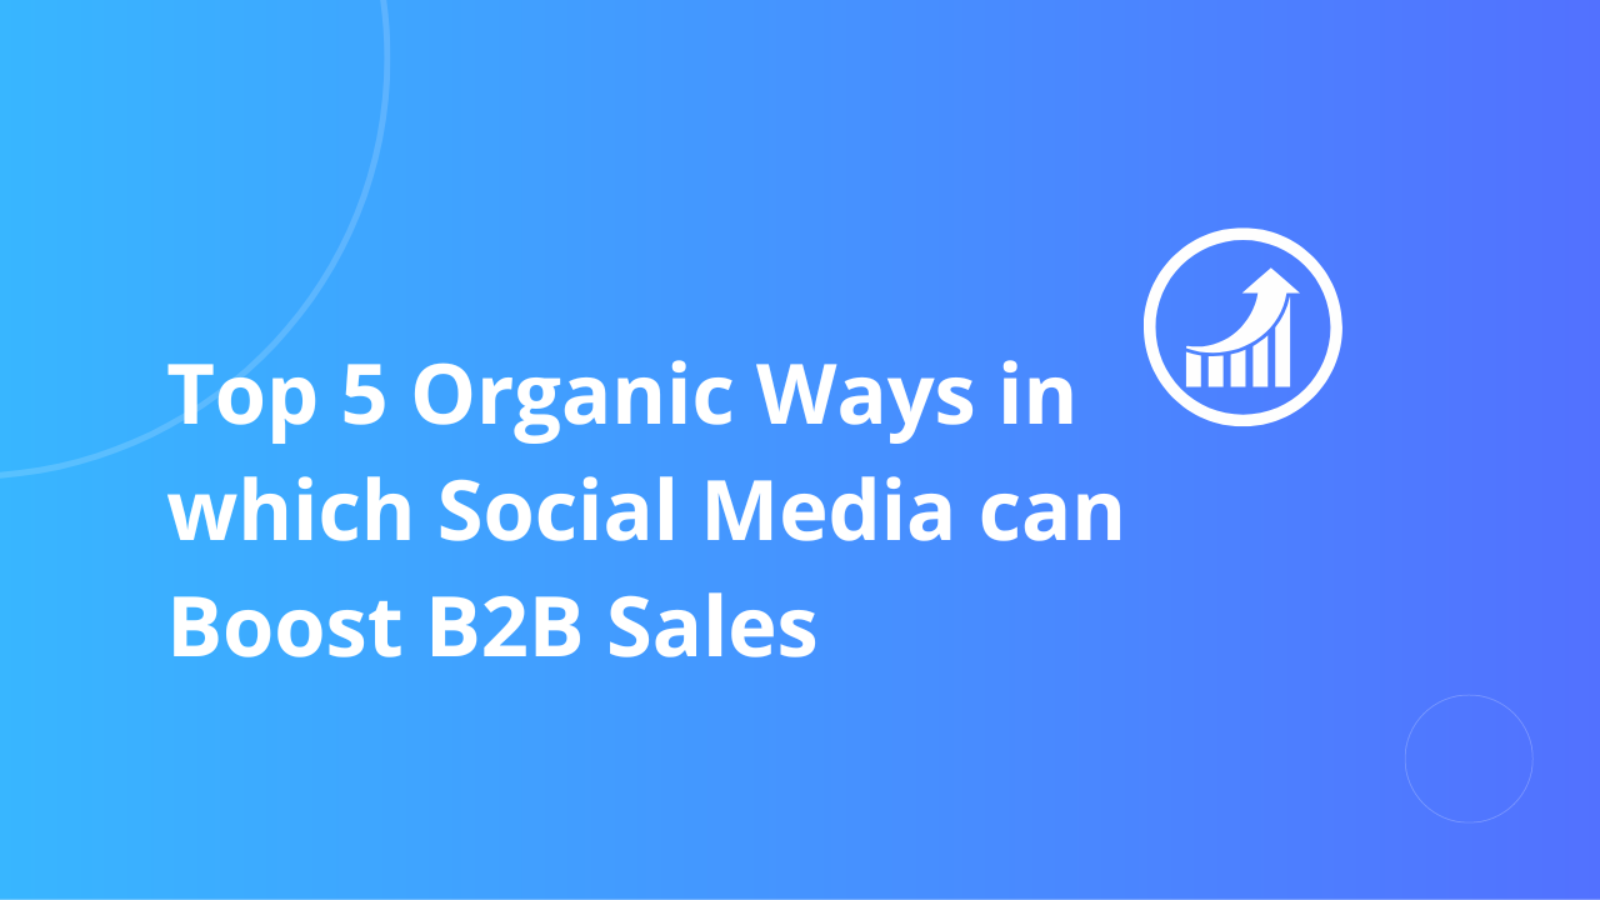 Top 5 Organic Ways in which Social Media Marketing can Boost B2B Sales